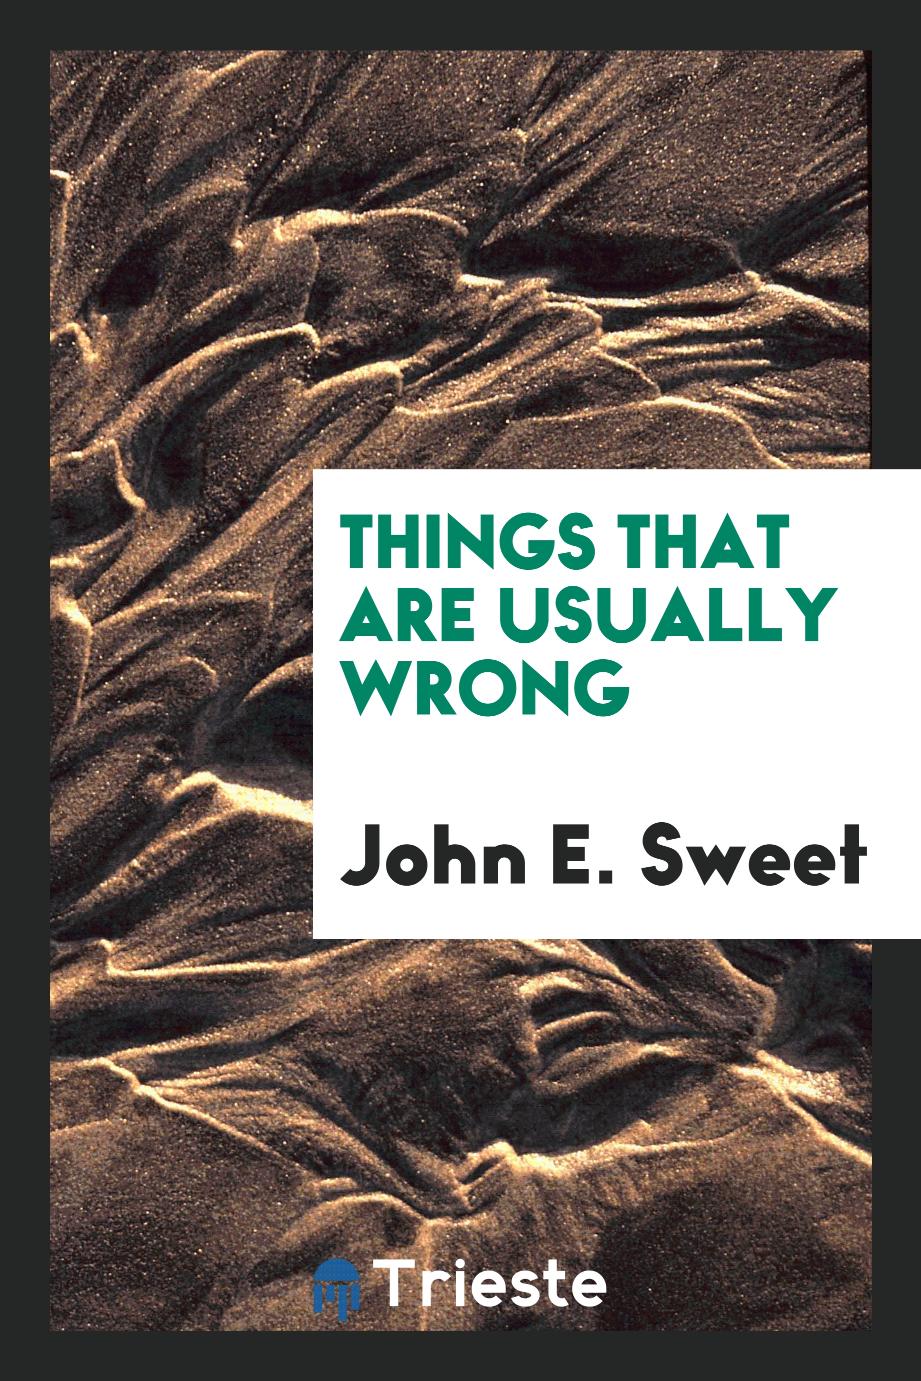 Things that are usually wrong